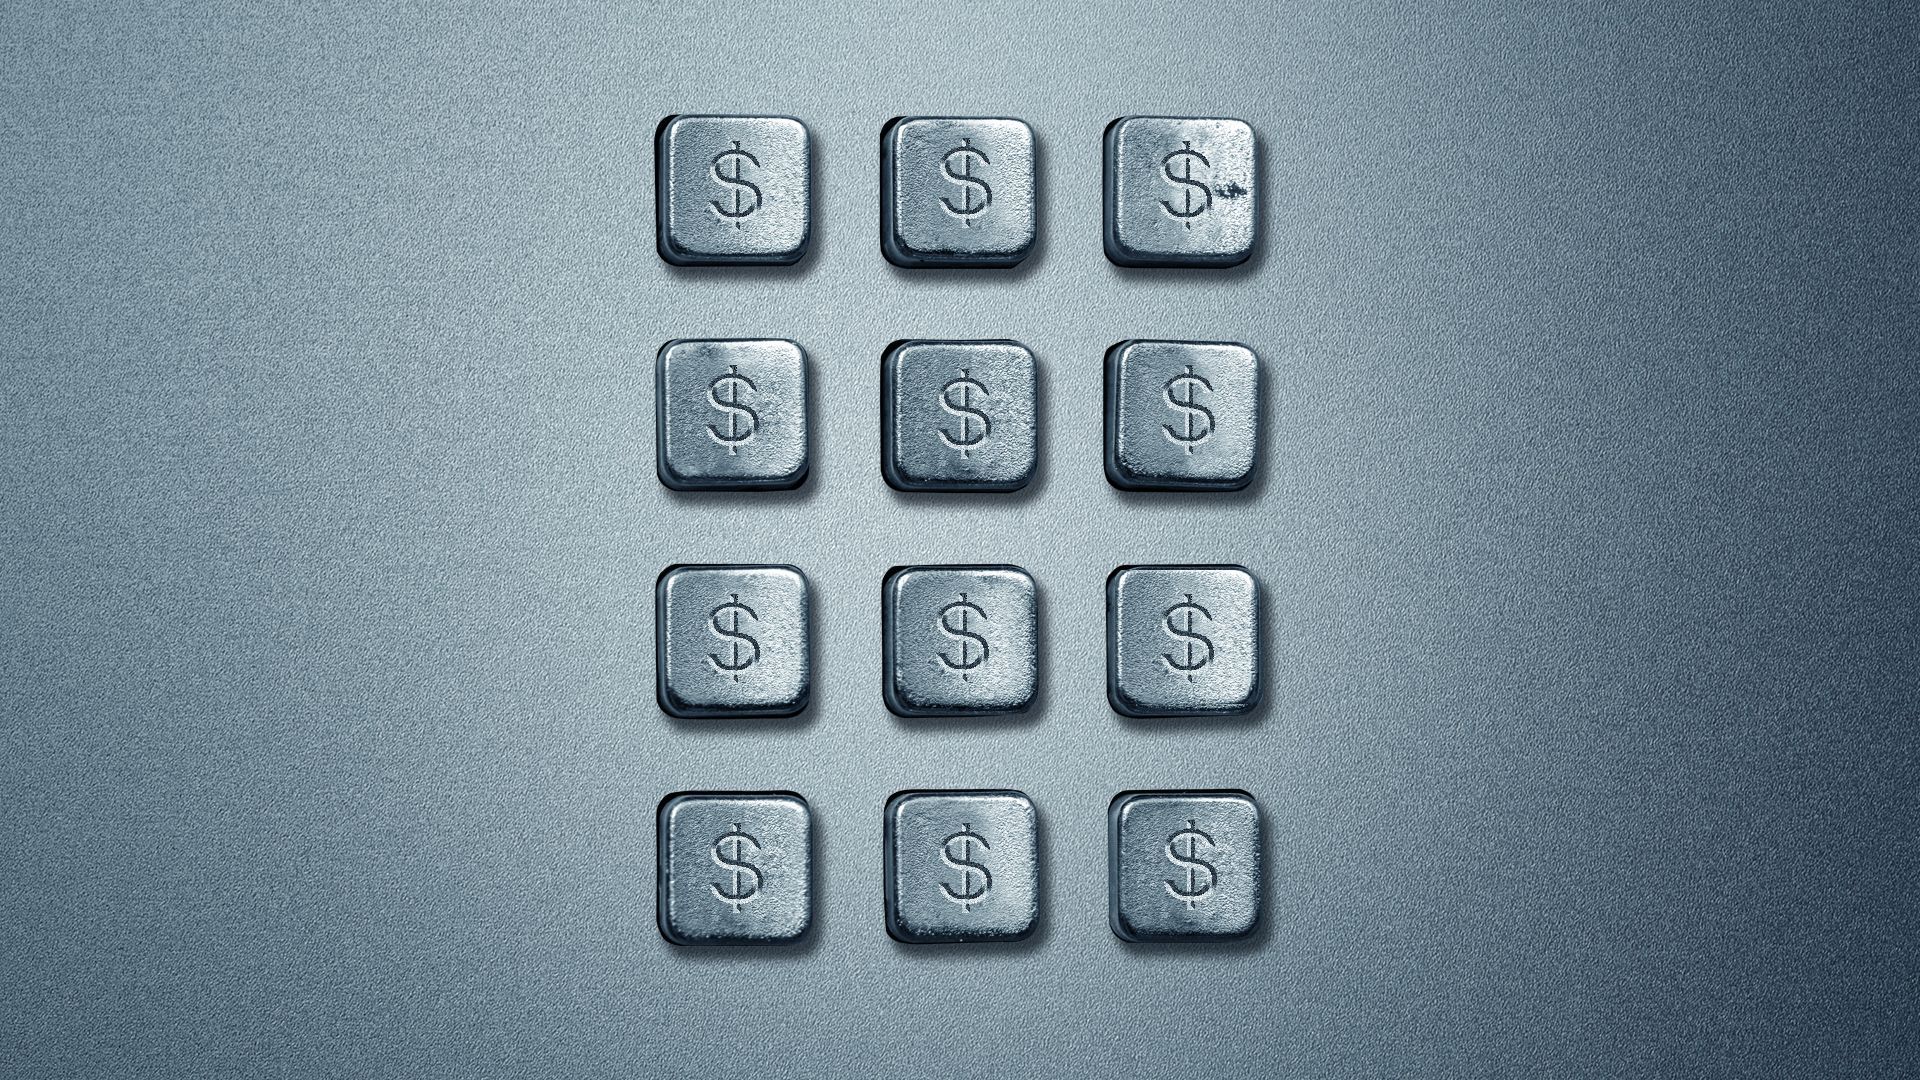 Illustration of a pay phone touchpad with dollar signs replacing the numbers.